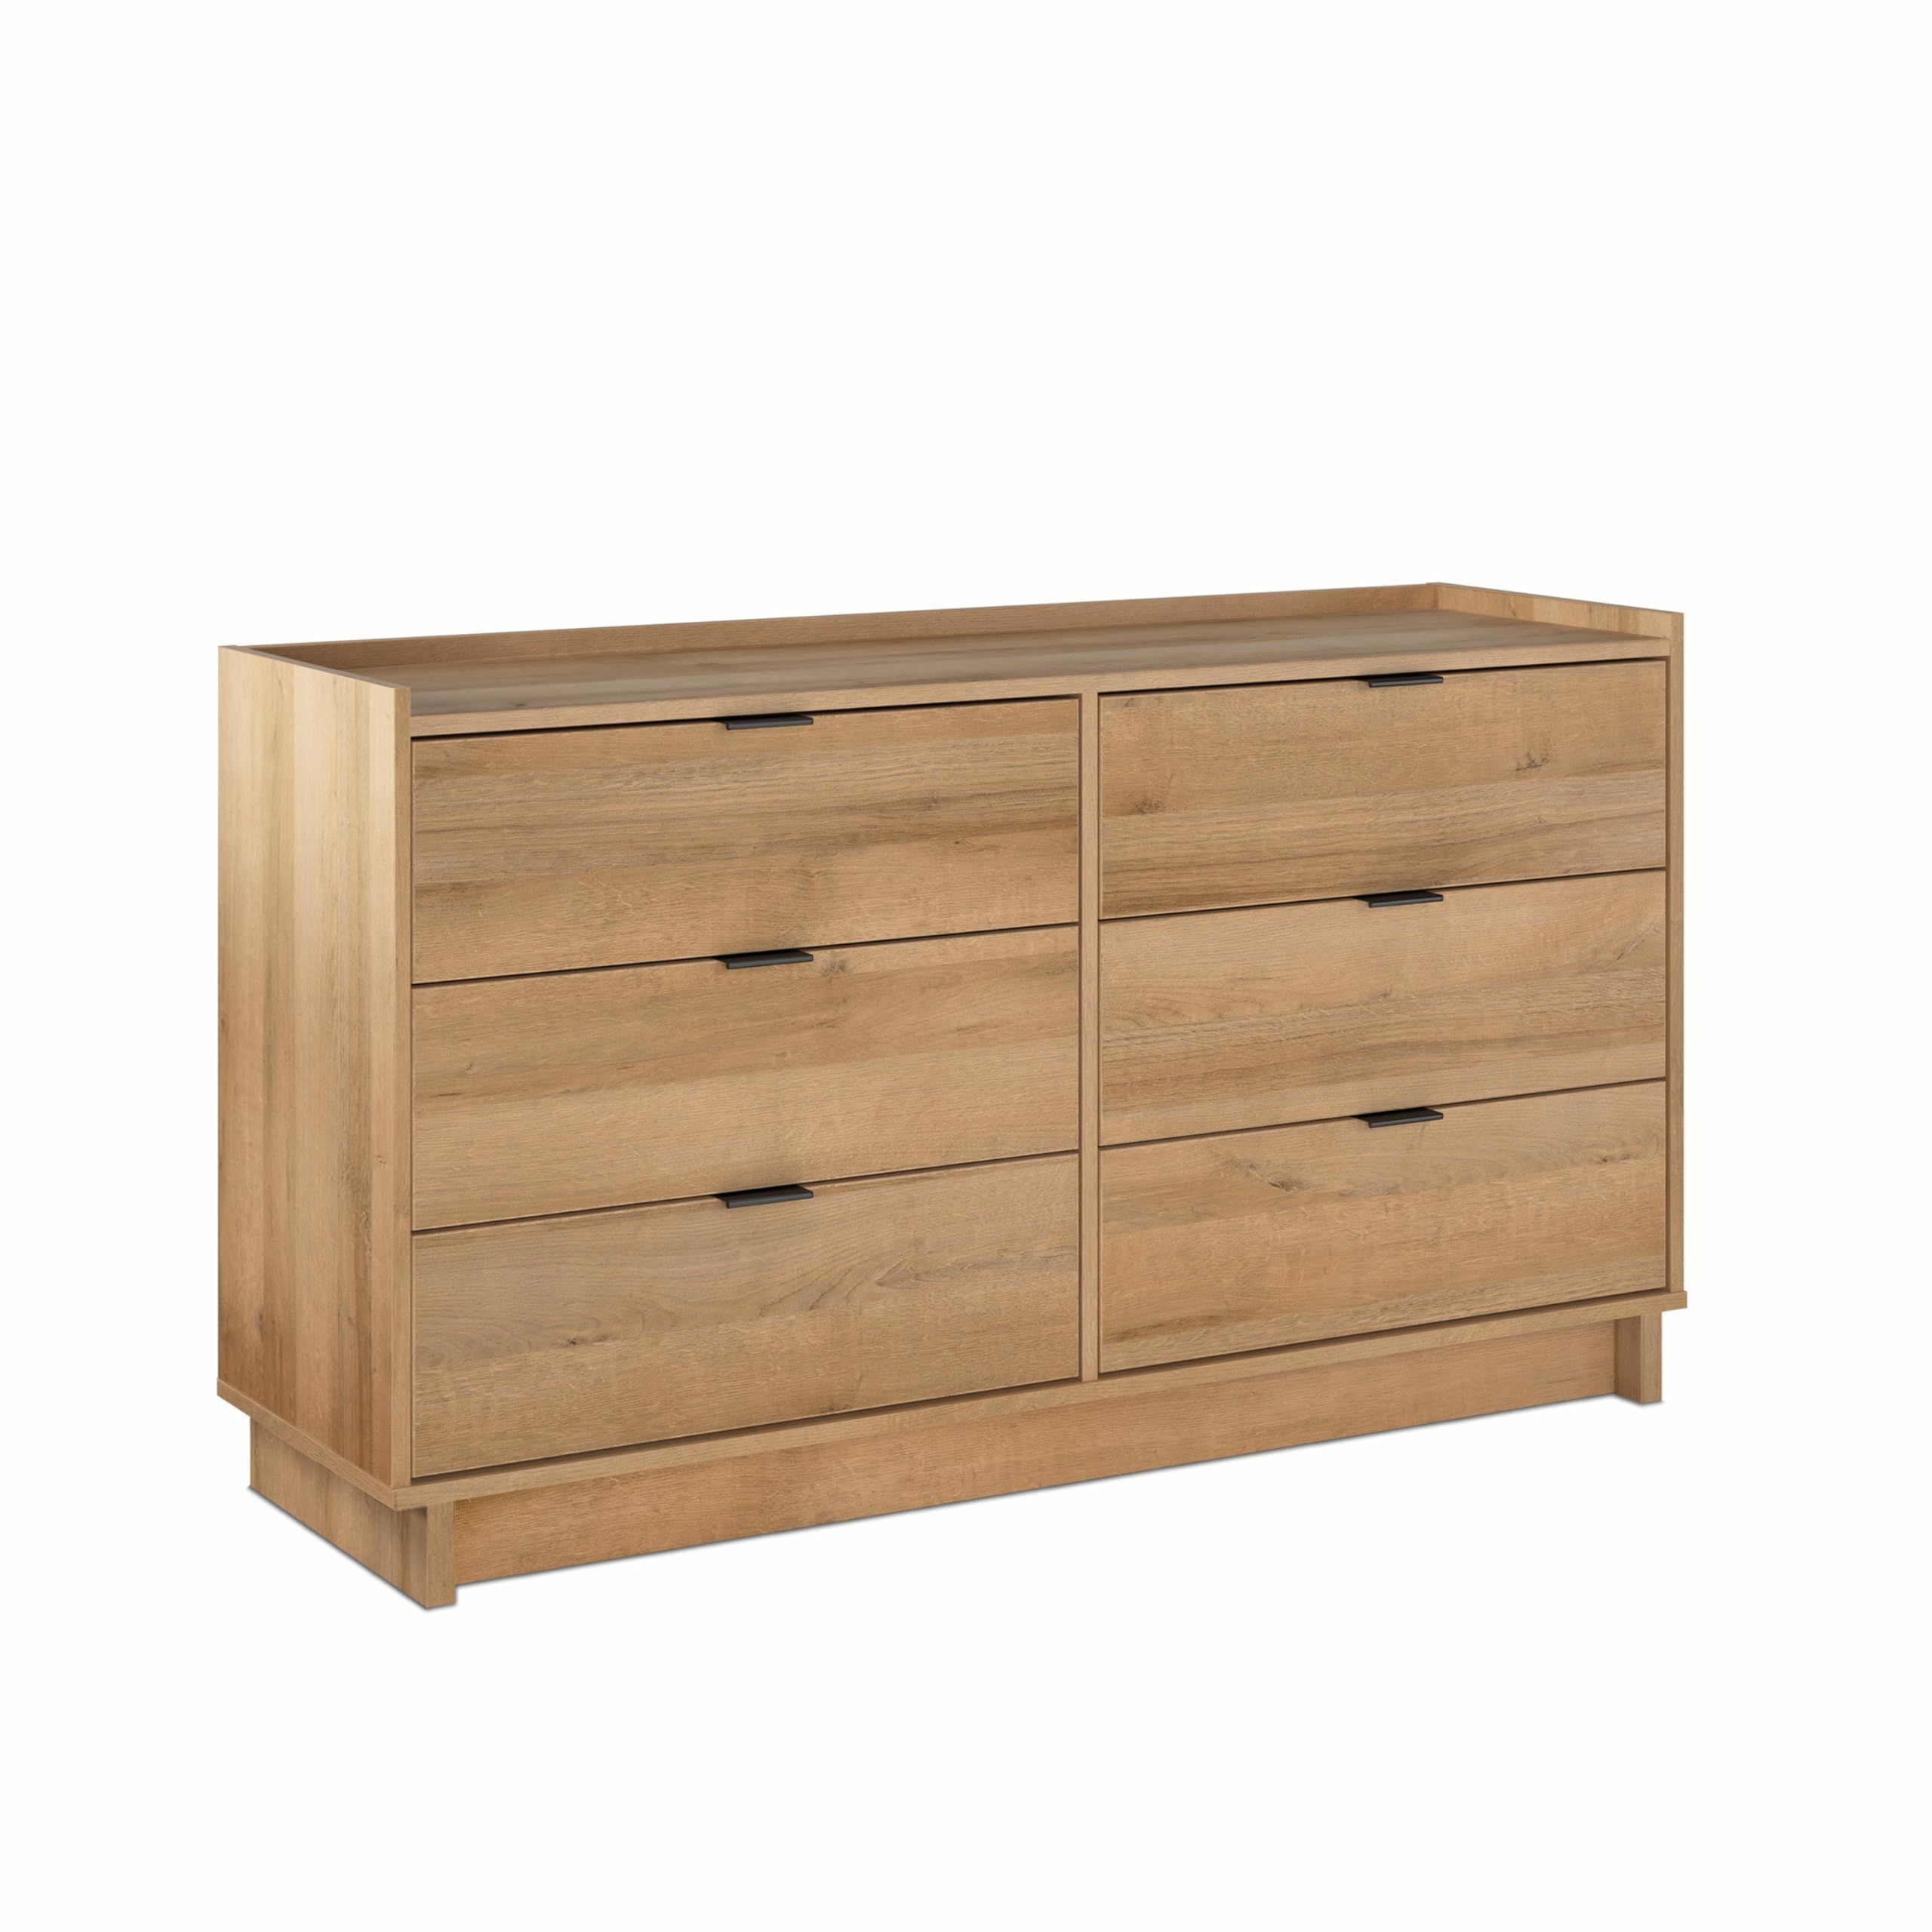 Exploring the Beauty of Bedroom Dressers and Chests